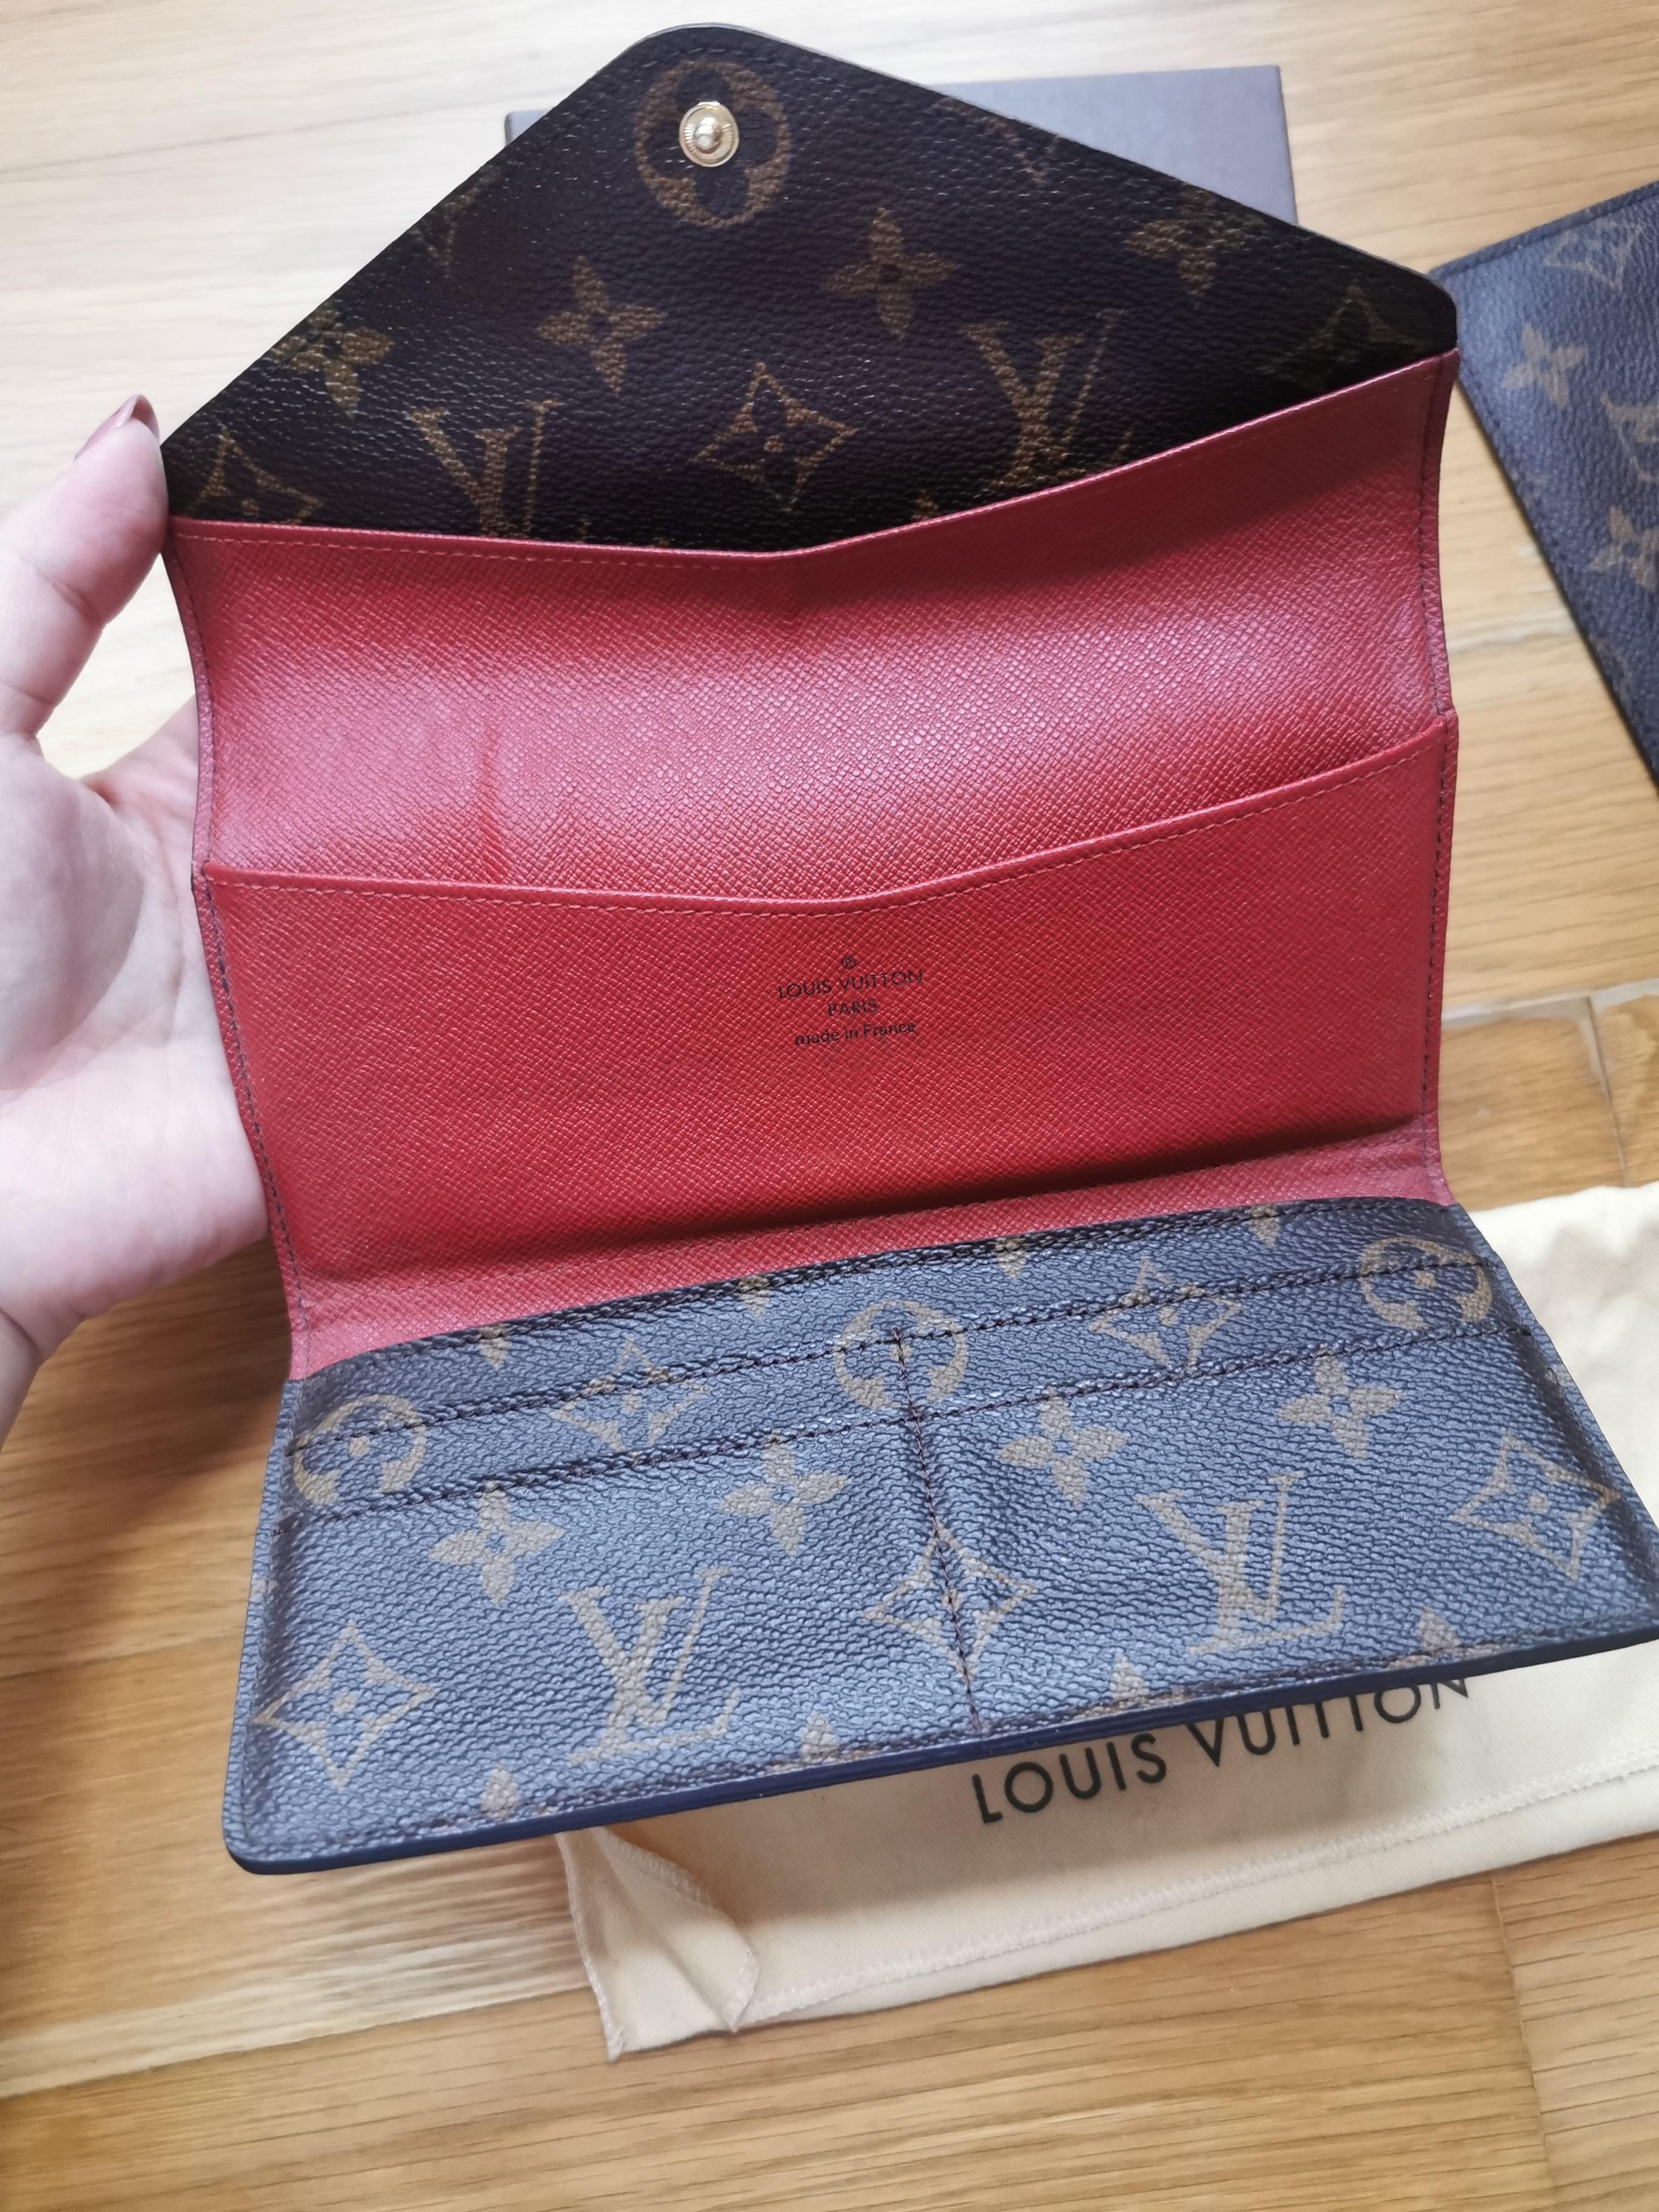 My new Louis Vuitton Josephine Wallet in red ♥ love love love it! I have  the BEST hubby ever!!! :)